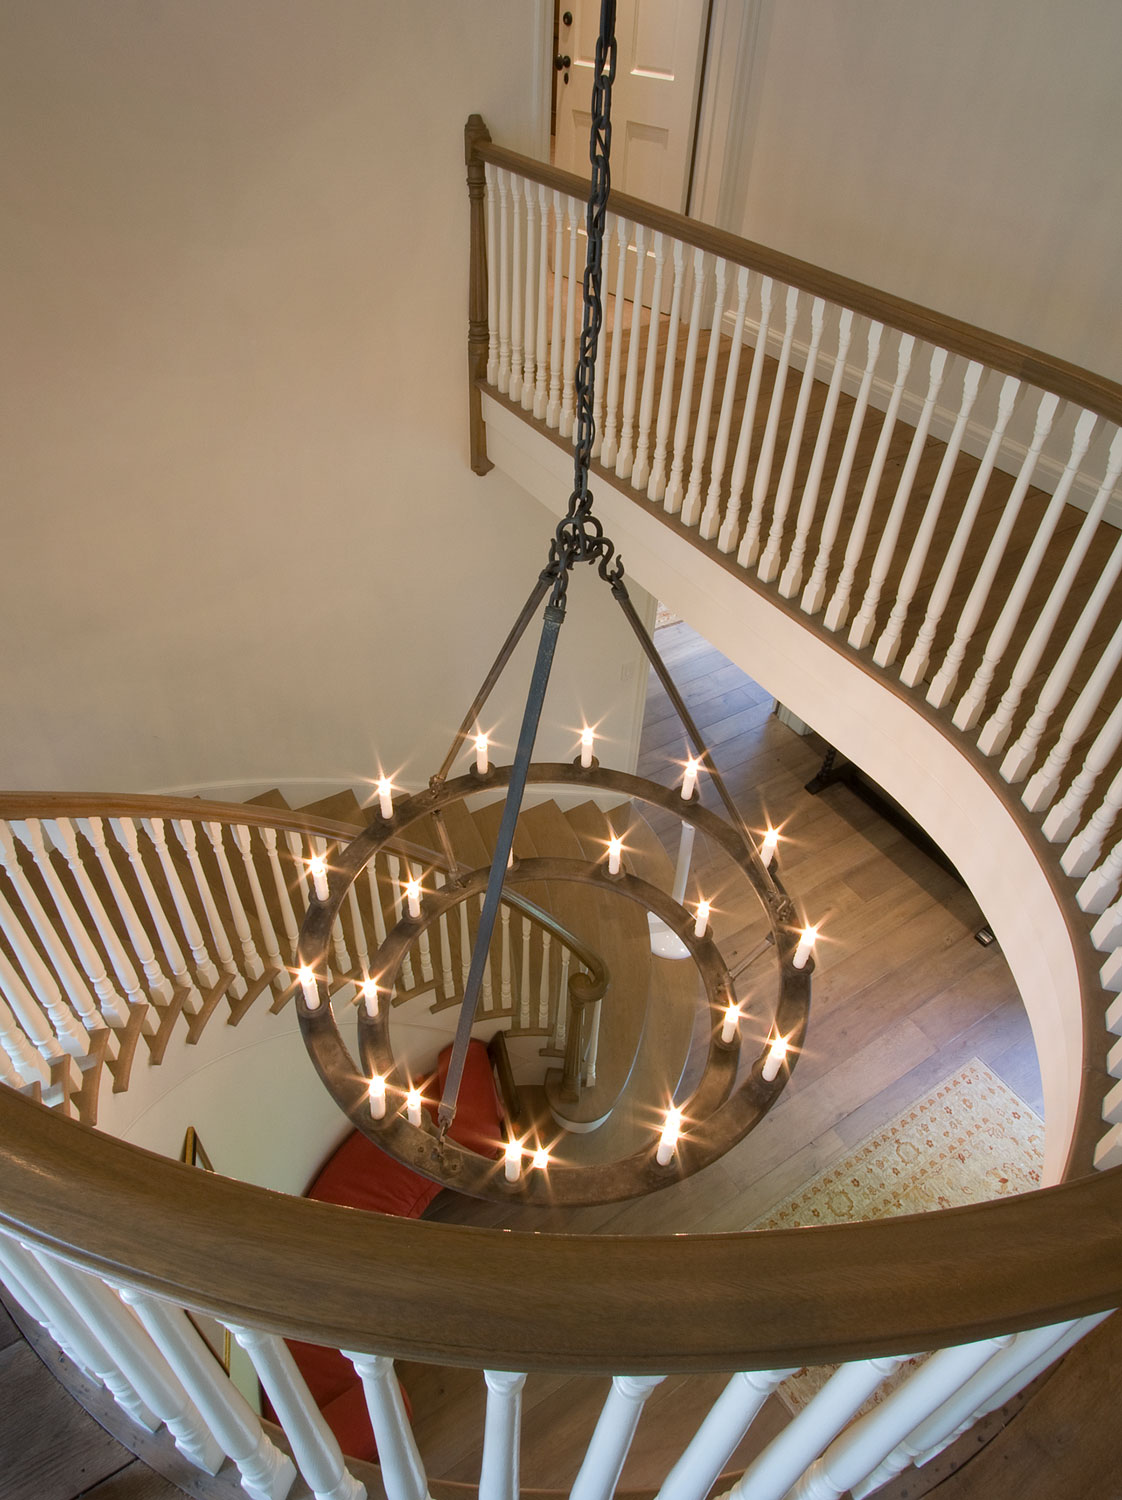 09-A-traditional-staircase-wood-railing-curved-gary-drake-general-contractor.jpg